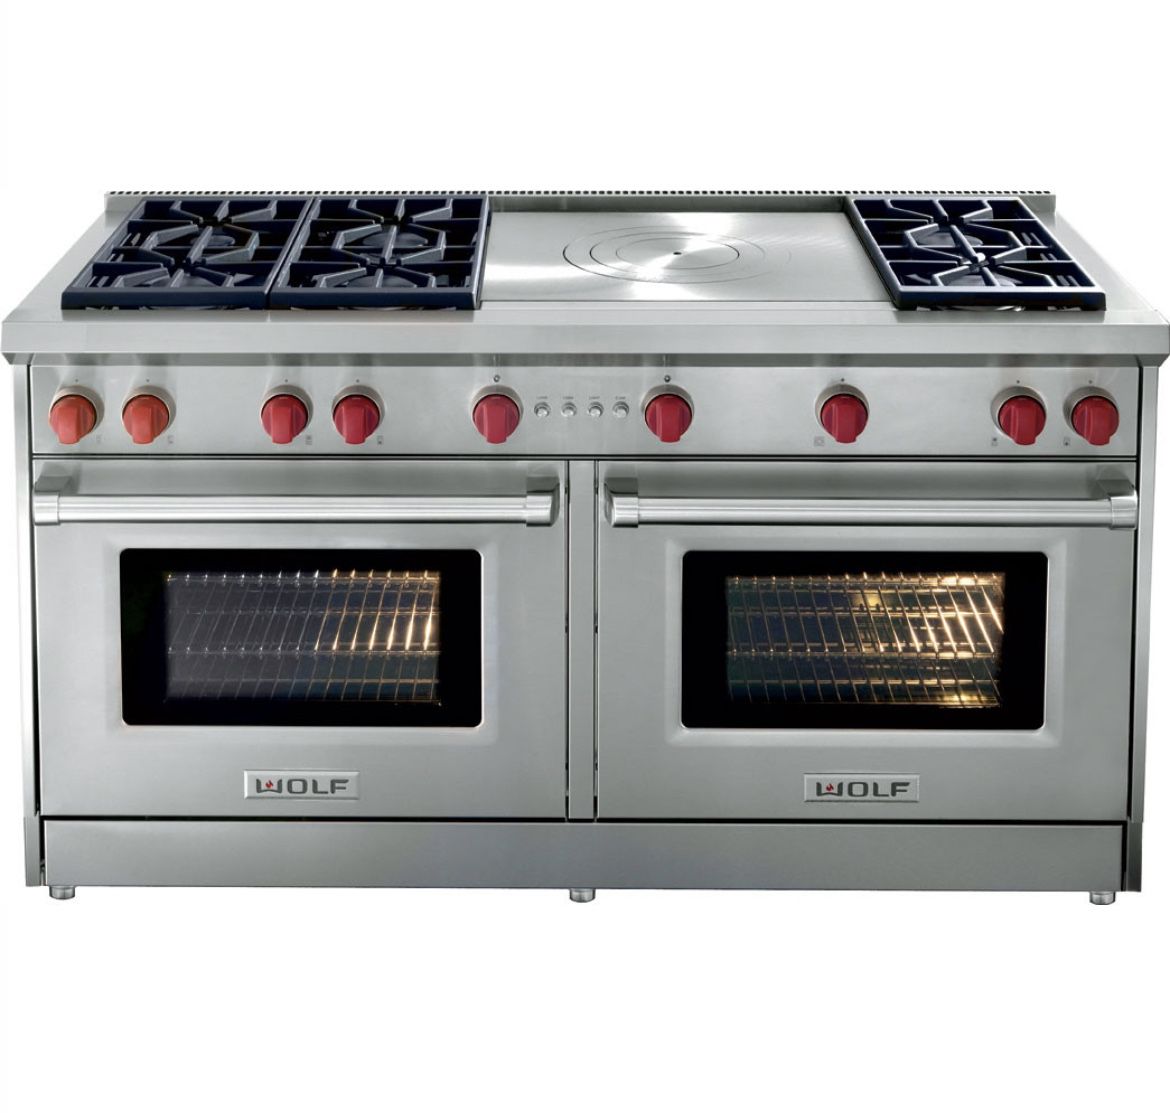 Wolf 60” Gas Range Brand new In Package 